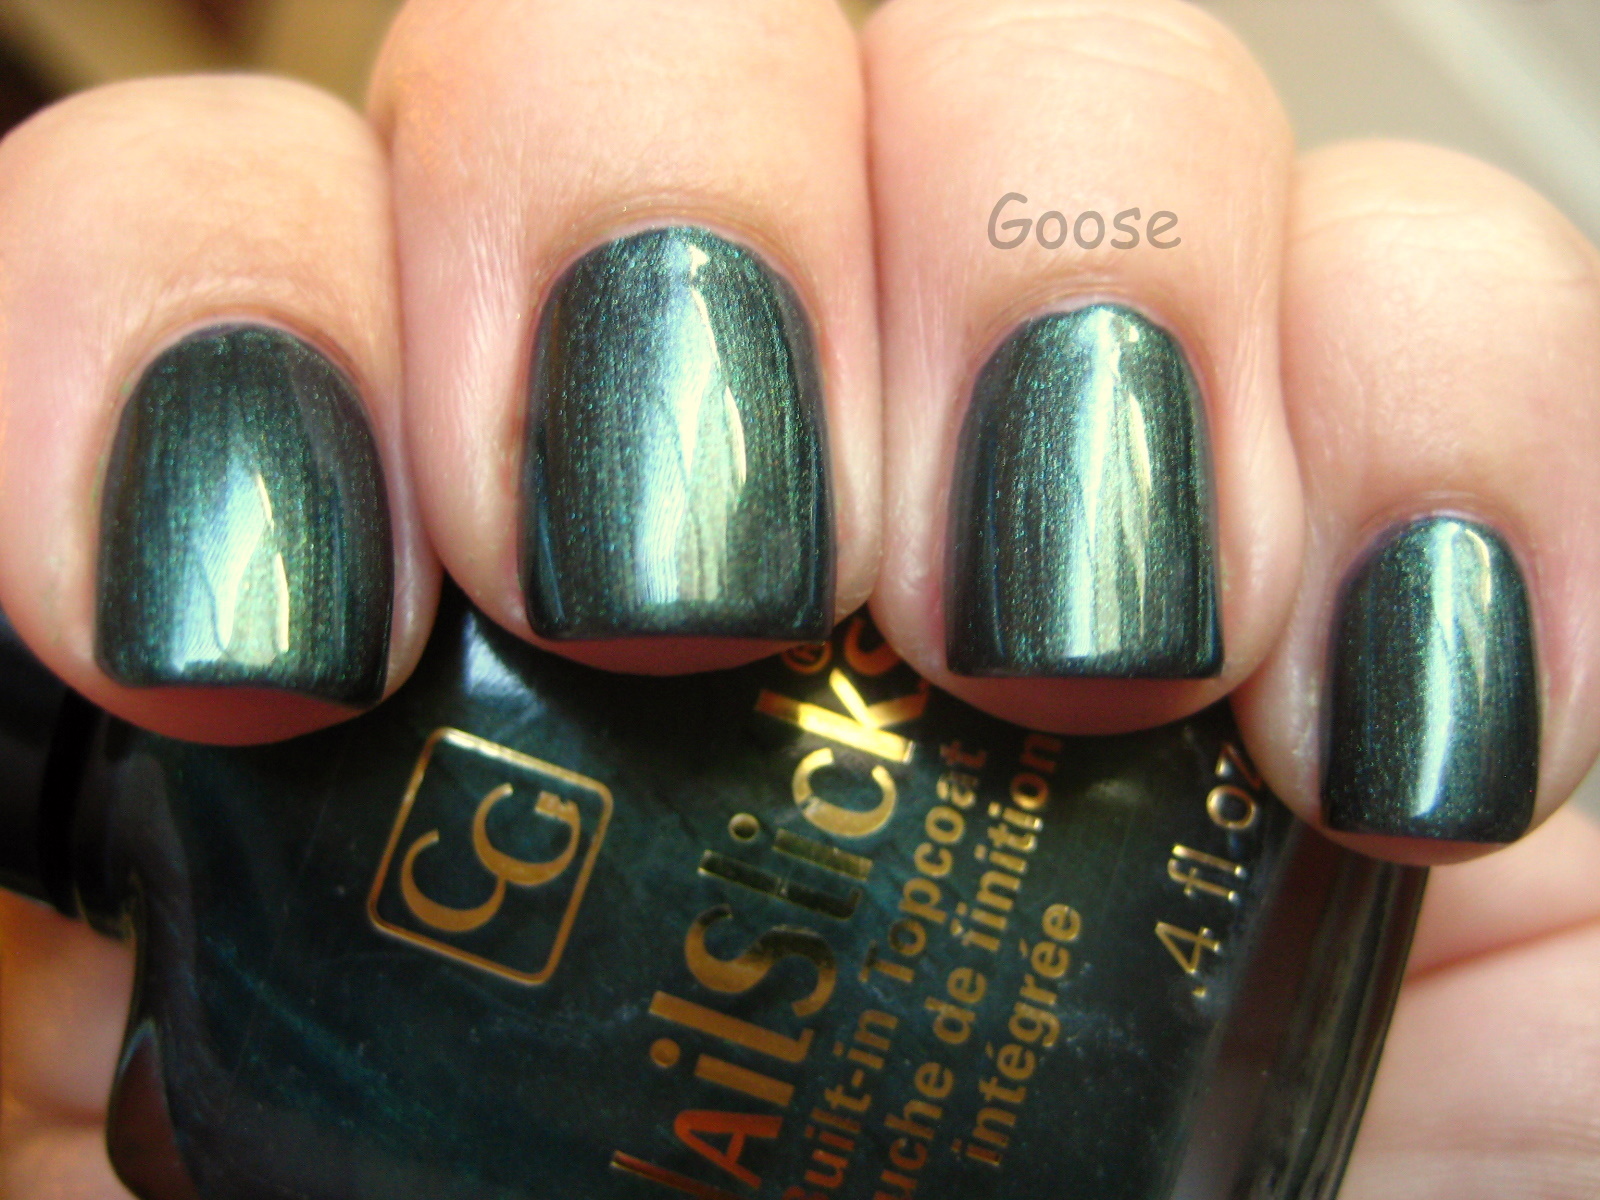 Goose's Glitter: CoverGirl Midnight Forest - Chanel Black Pearl dupe?